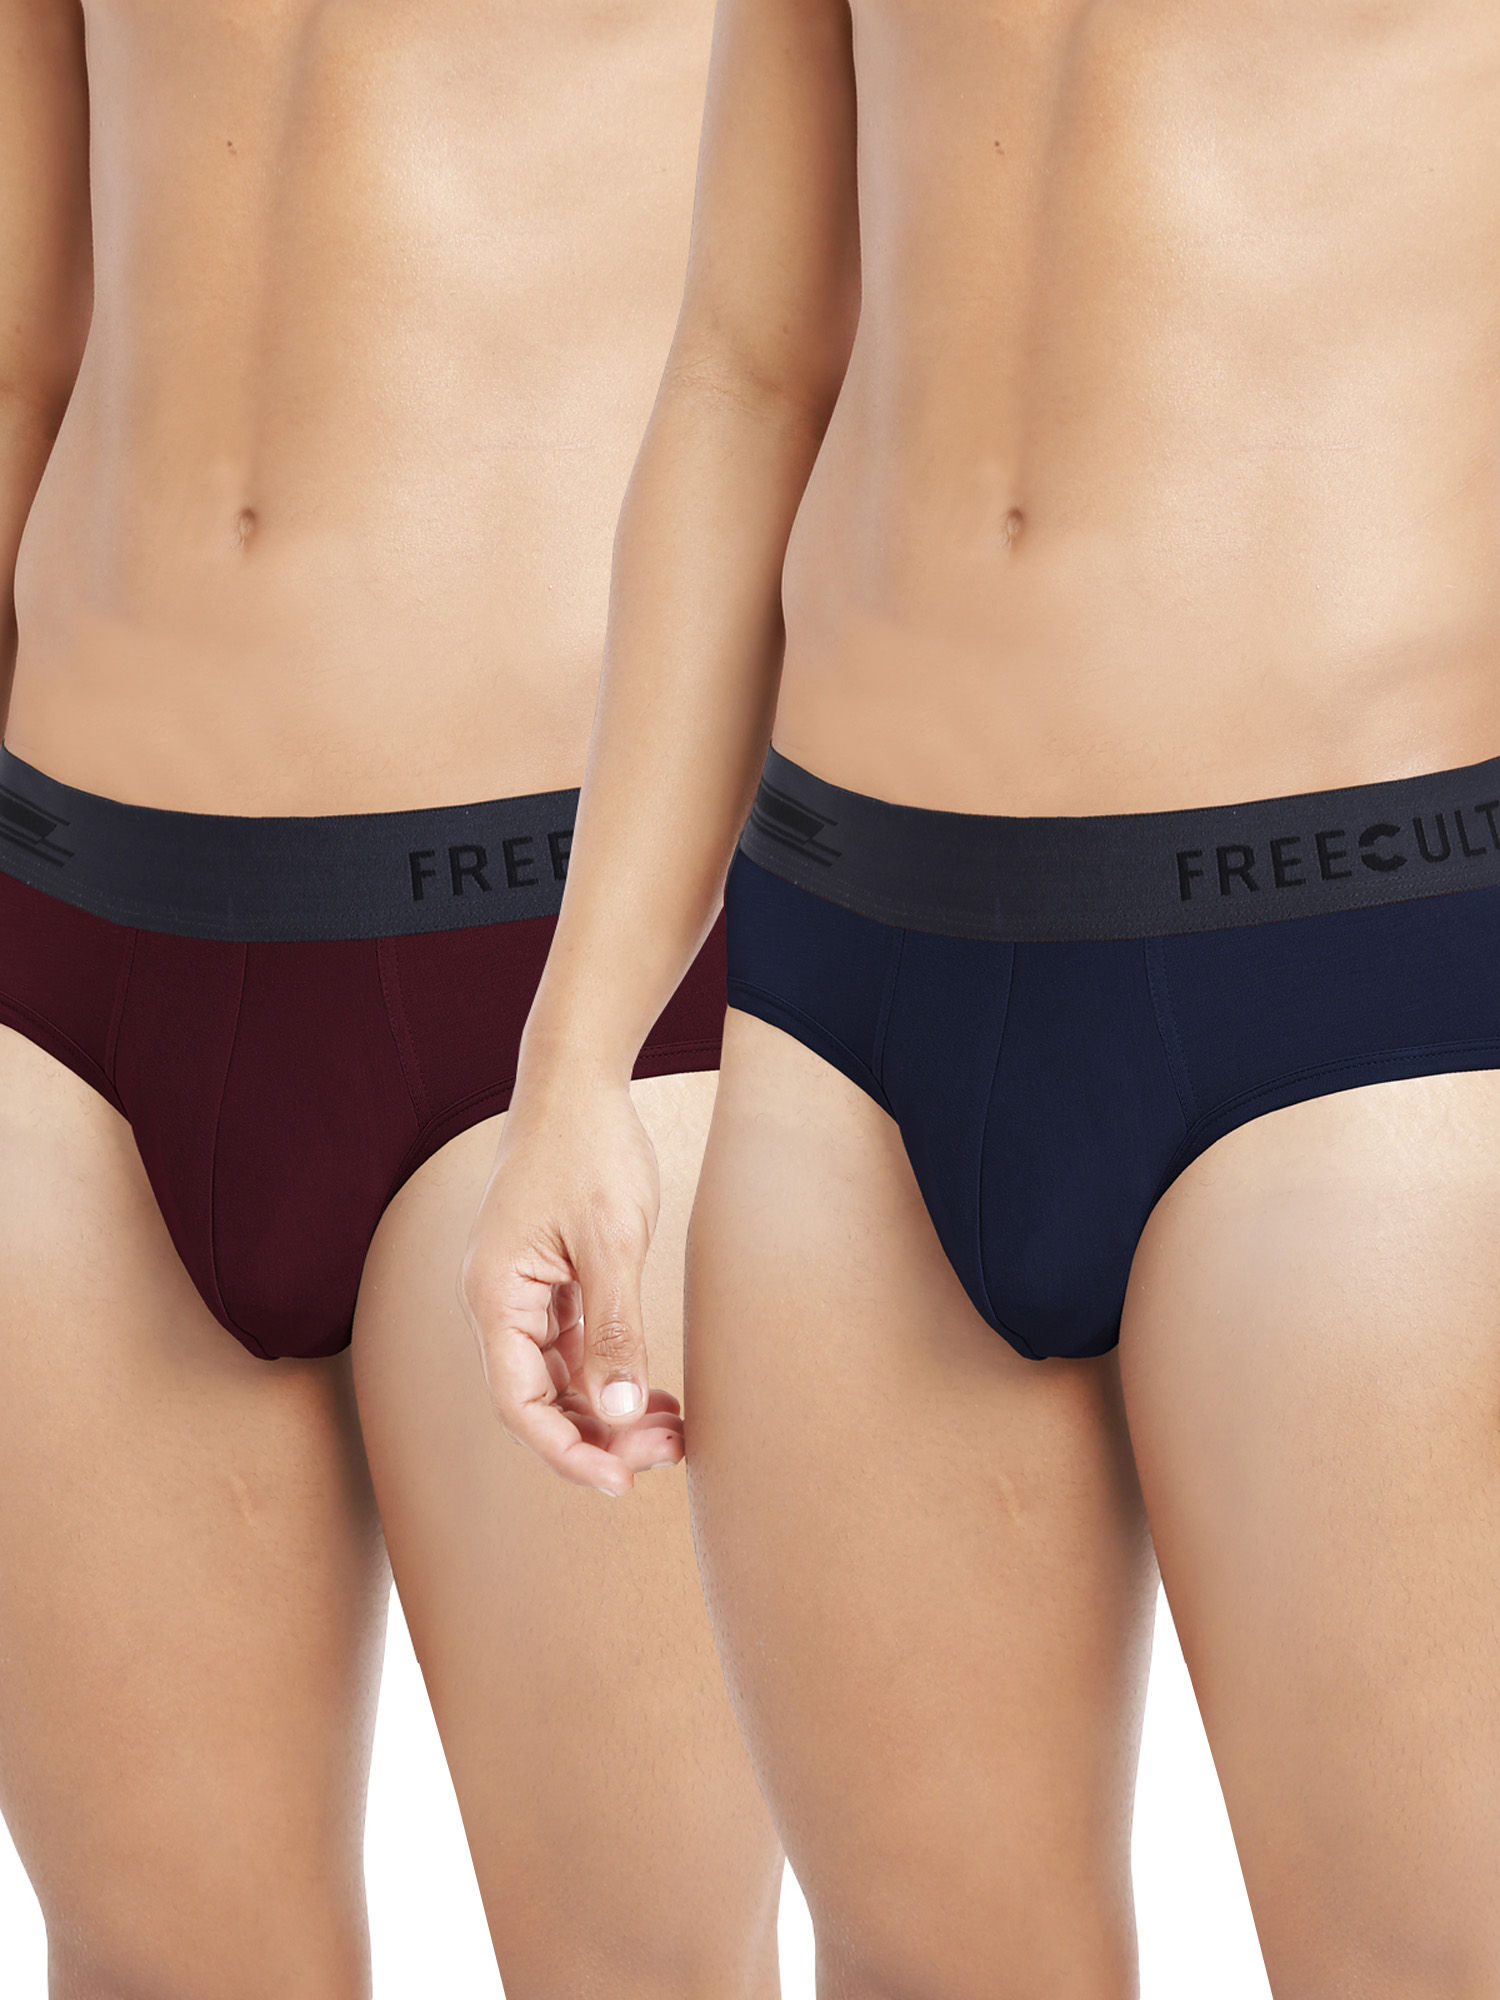 FREECULTR Anti-Microbial Air-Soft Micromodal Underwear Brief Pack Of 2 - Multi-Color (L)